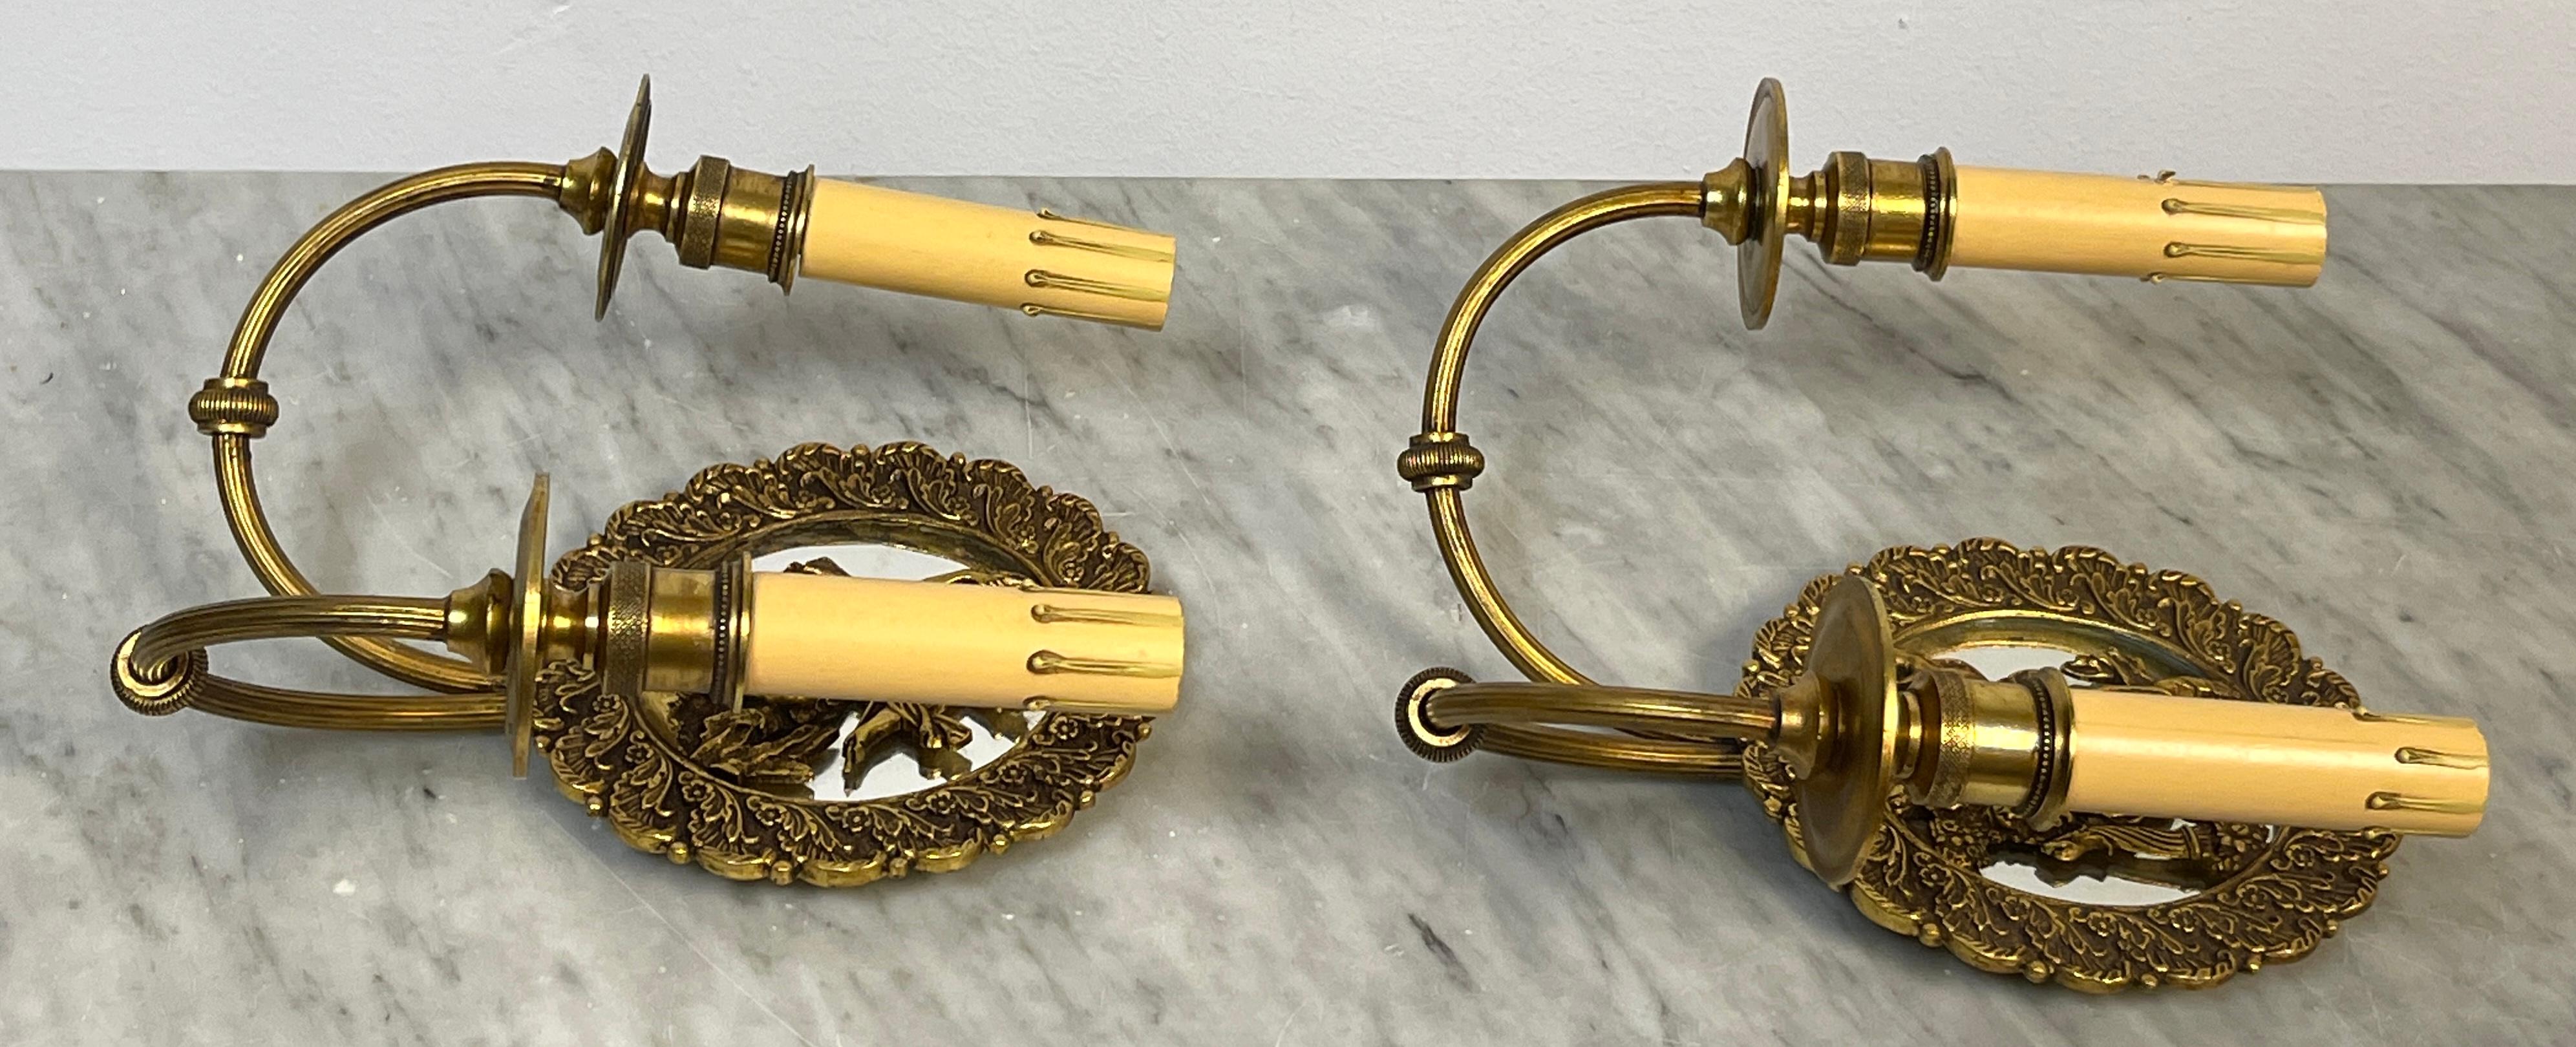 Pair of French Bronze & Mirror Medallion 'America & Europe'  Wall Sconces   In Good Condition For Sale In West Palm Beach, FL